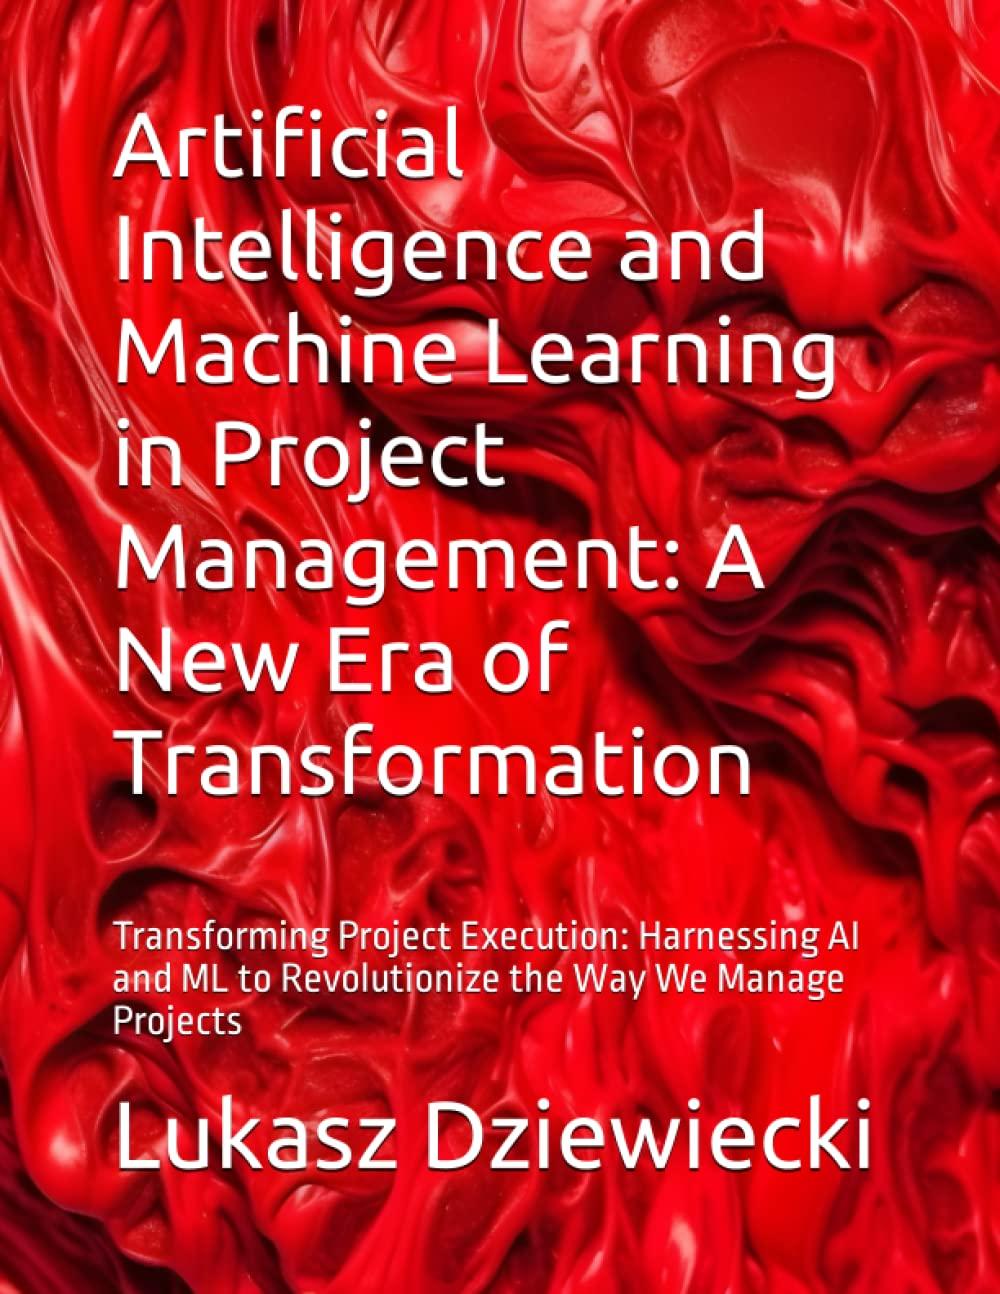 Artificial Intelligence And Machine Learning In Project Management A New Era Of Transformation Transforming Project Execution Harnessing AI And ML To Revolutionize The Way We Manage Projects